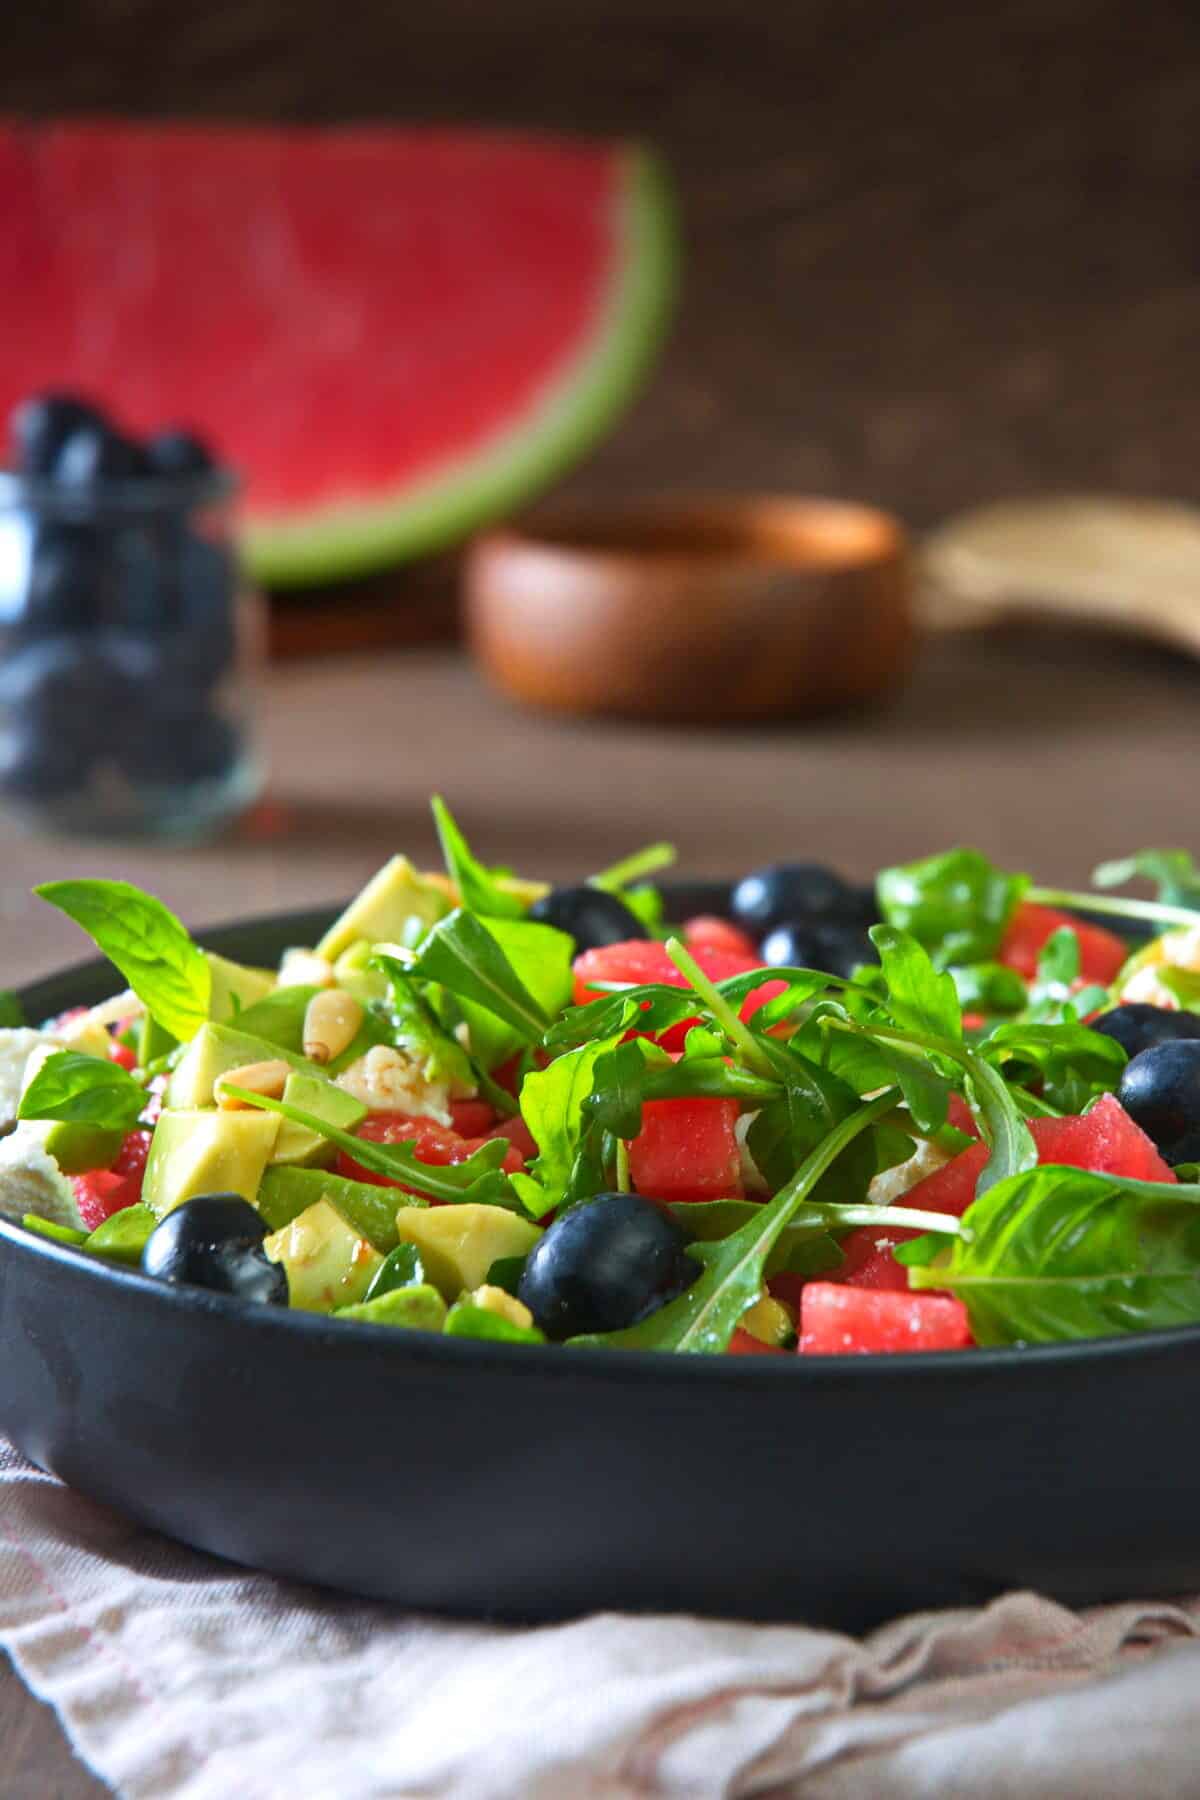 Watermelon salad in a black salad bowl, front view.